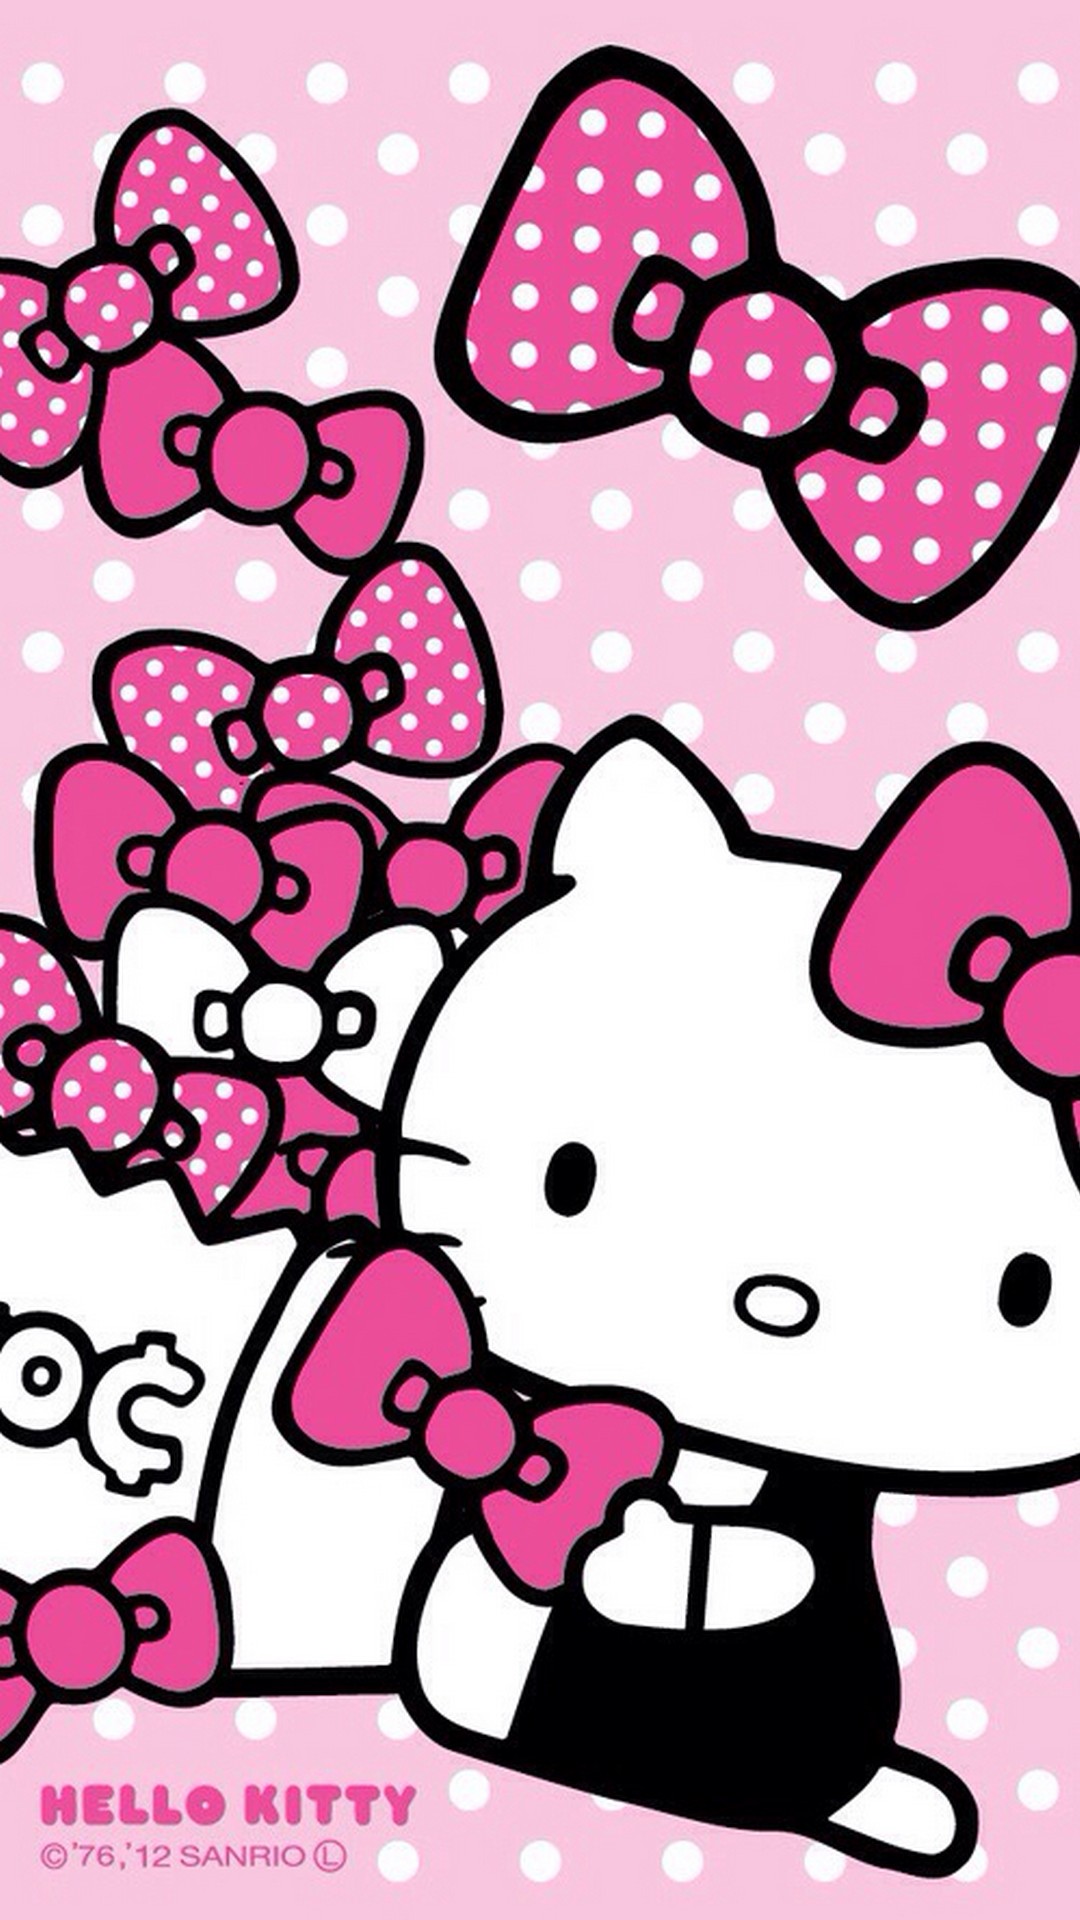 Wallpaper Sanrio Hello Kitty iPhone with resolution 1080X1920 pixel. You can use this wallpaper as background for your desktop Computer Screensavers, Android or iPhone smartphones